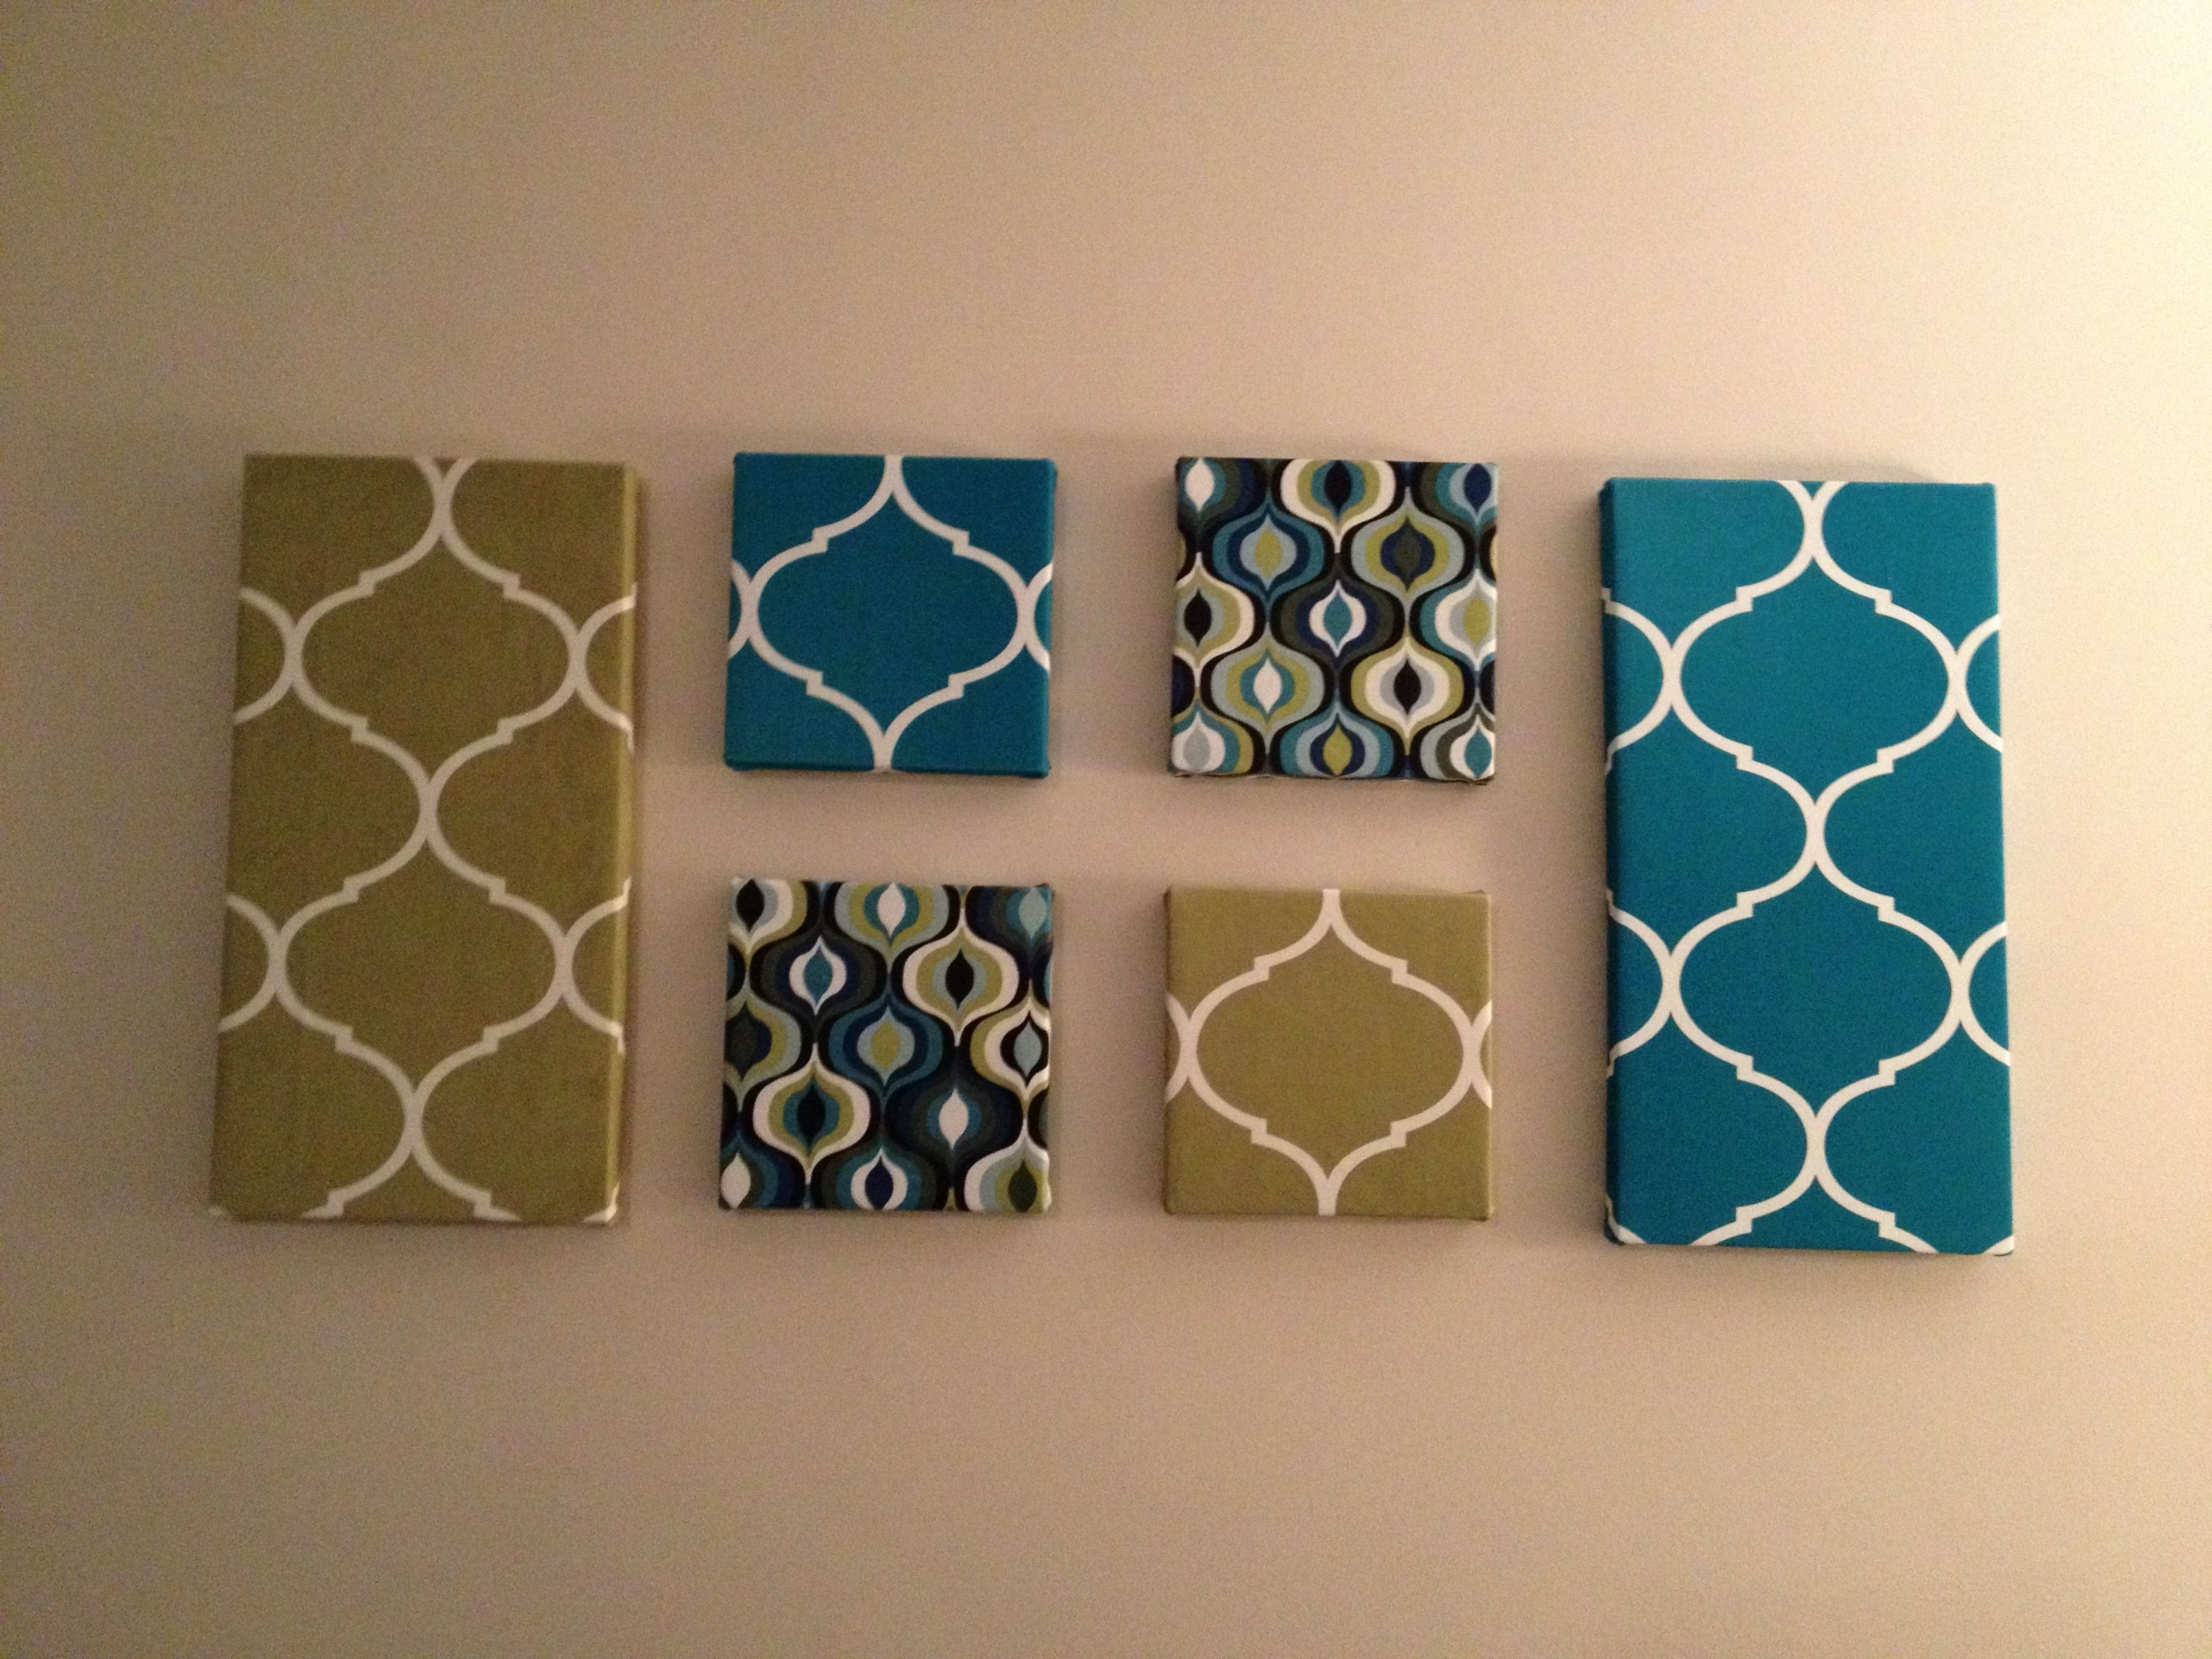 Wall Art: Fabric Covered Canvases | Candy And Her Cupcakes Within Newest Fabric Wall Art Canvas (View 1 of 15)